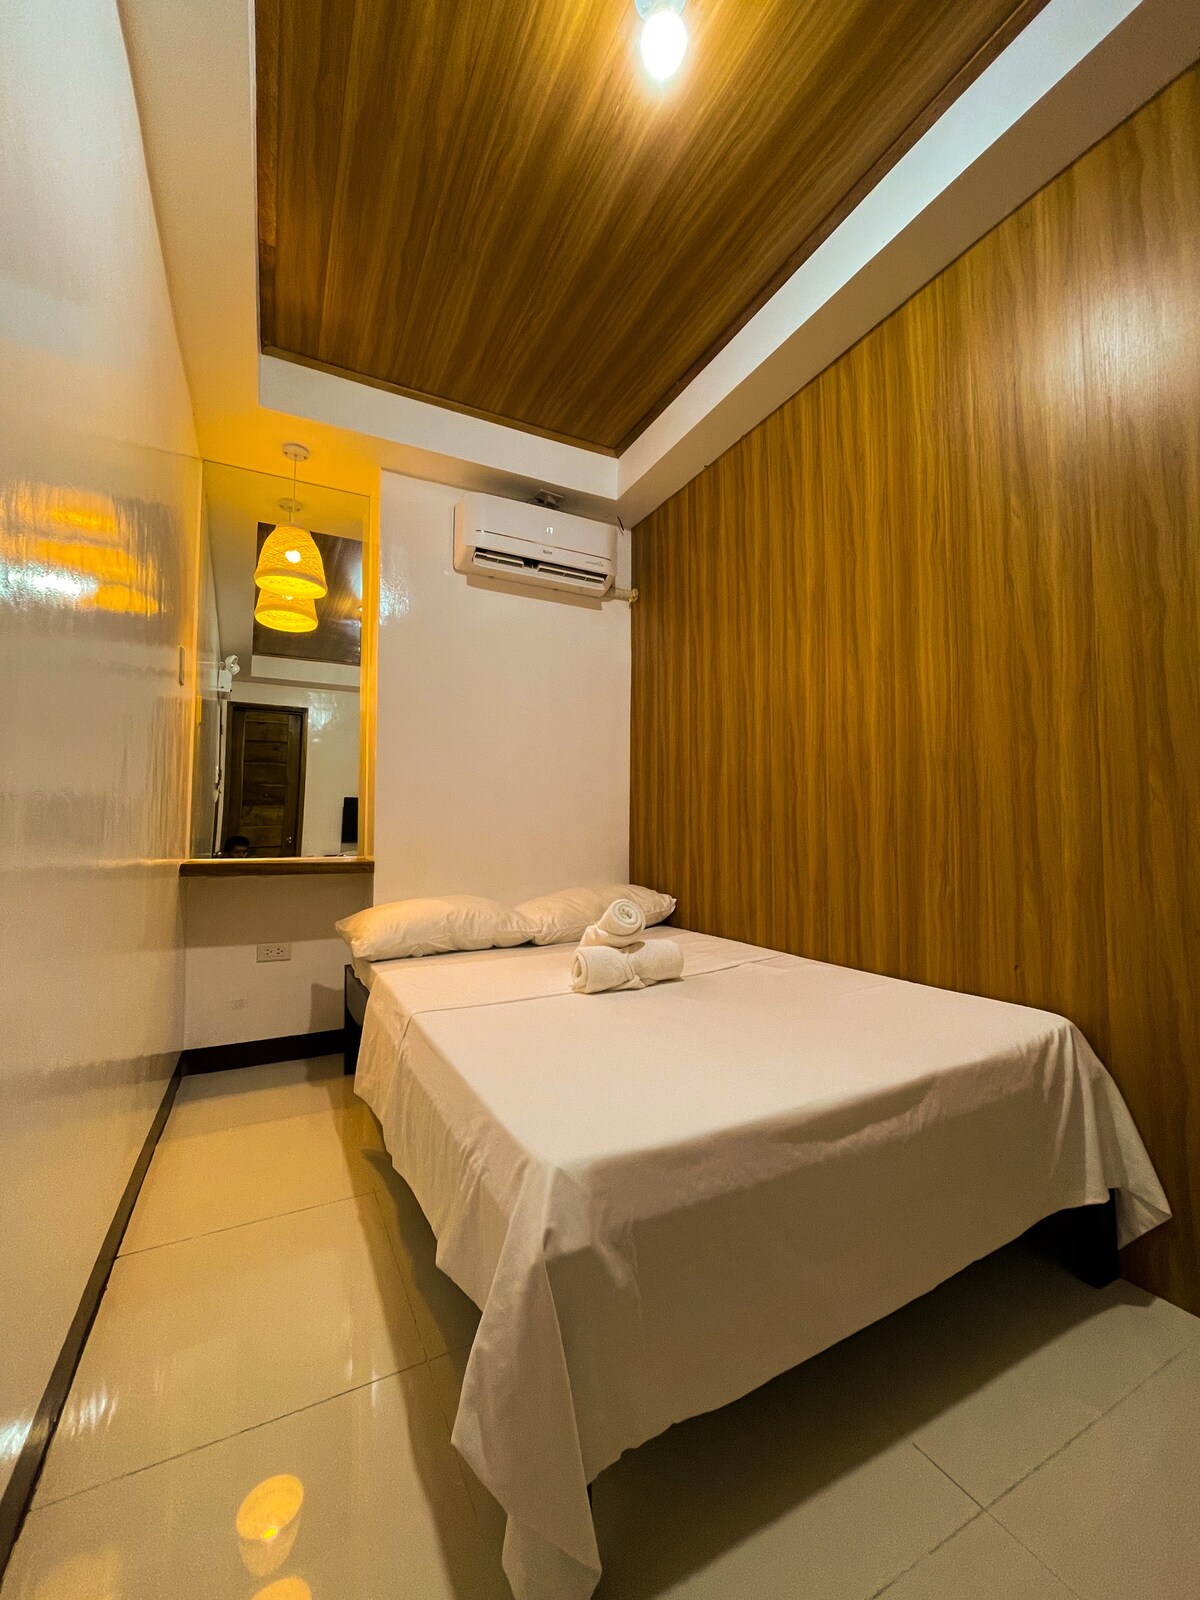 Leila Pension House - Deluxe (2 pax) 3 hours